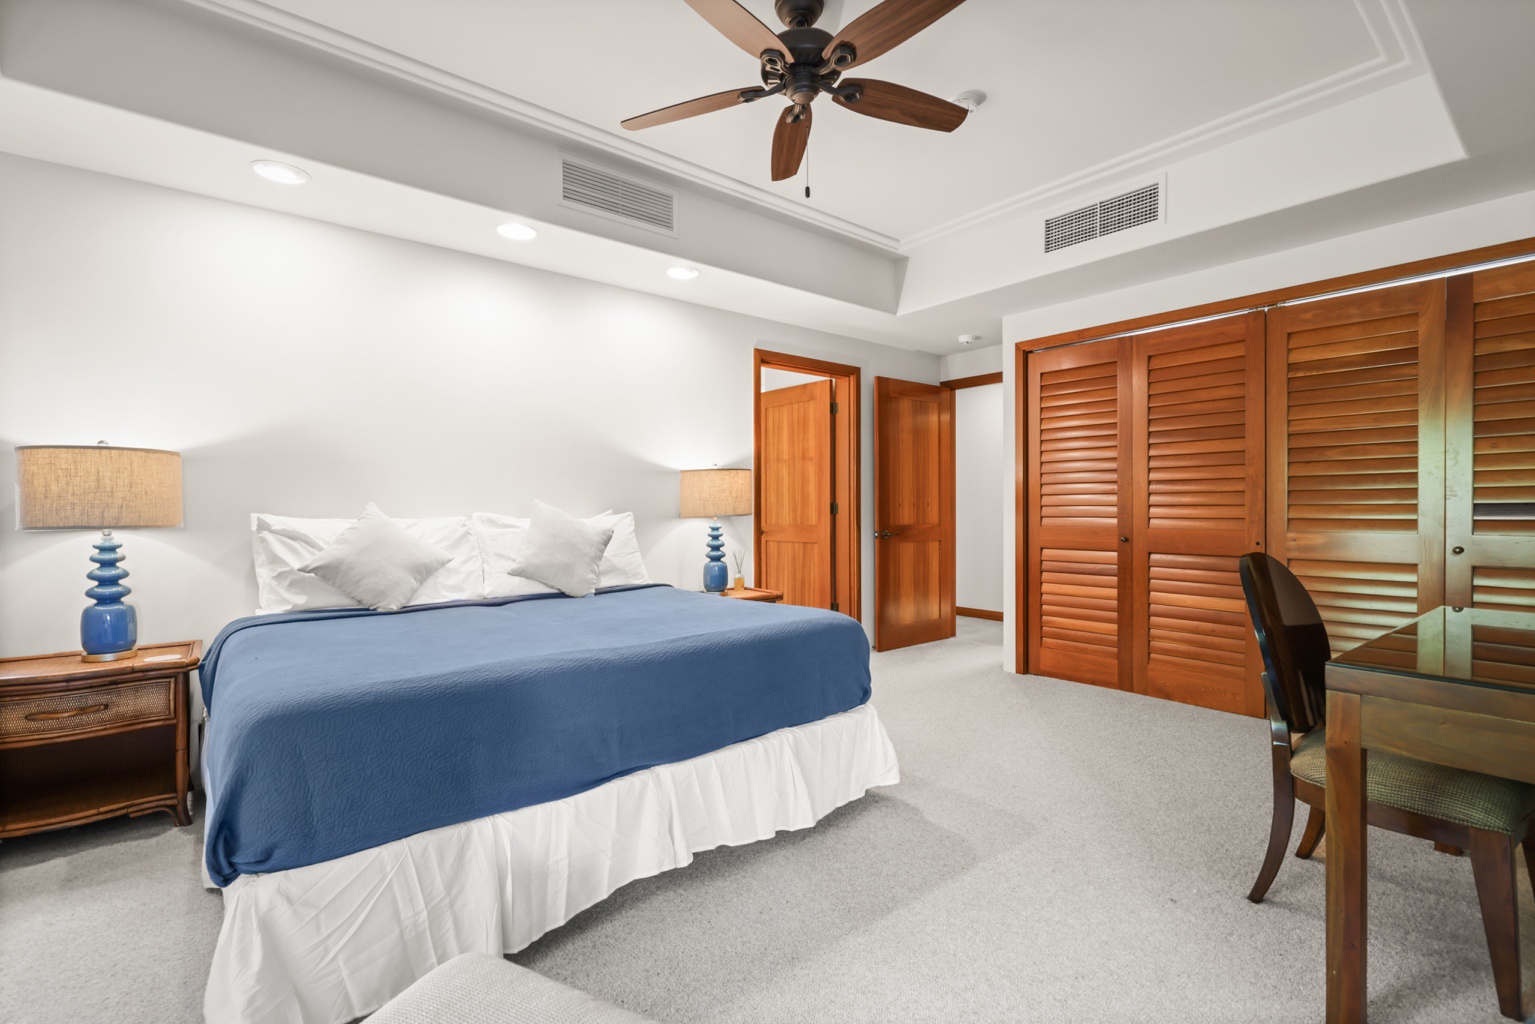 Kailua Kona Vacation Rentals, 3BD Golf Villa (3101) at Four Seasons Resort at Hualalai - Second bedroom offers two twin beds which can be converted to a king bed upon request